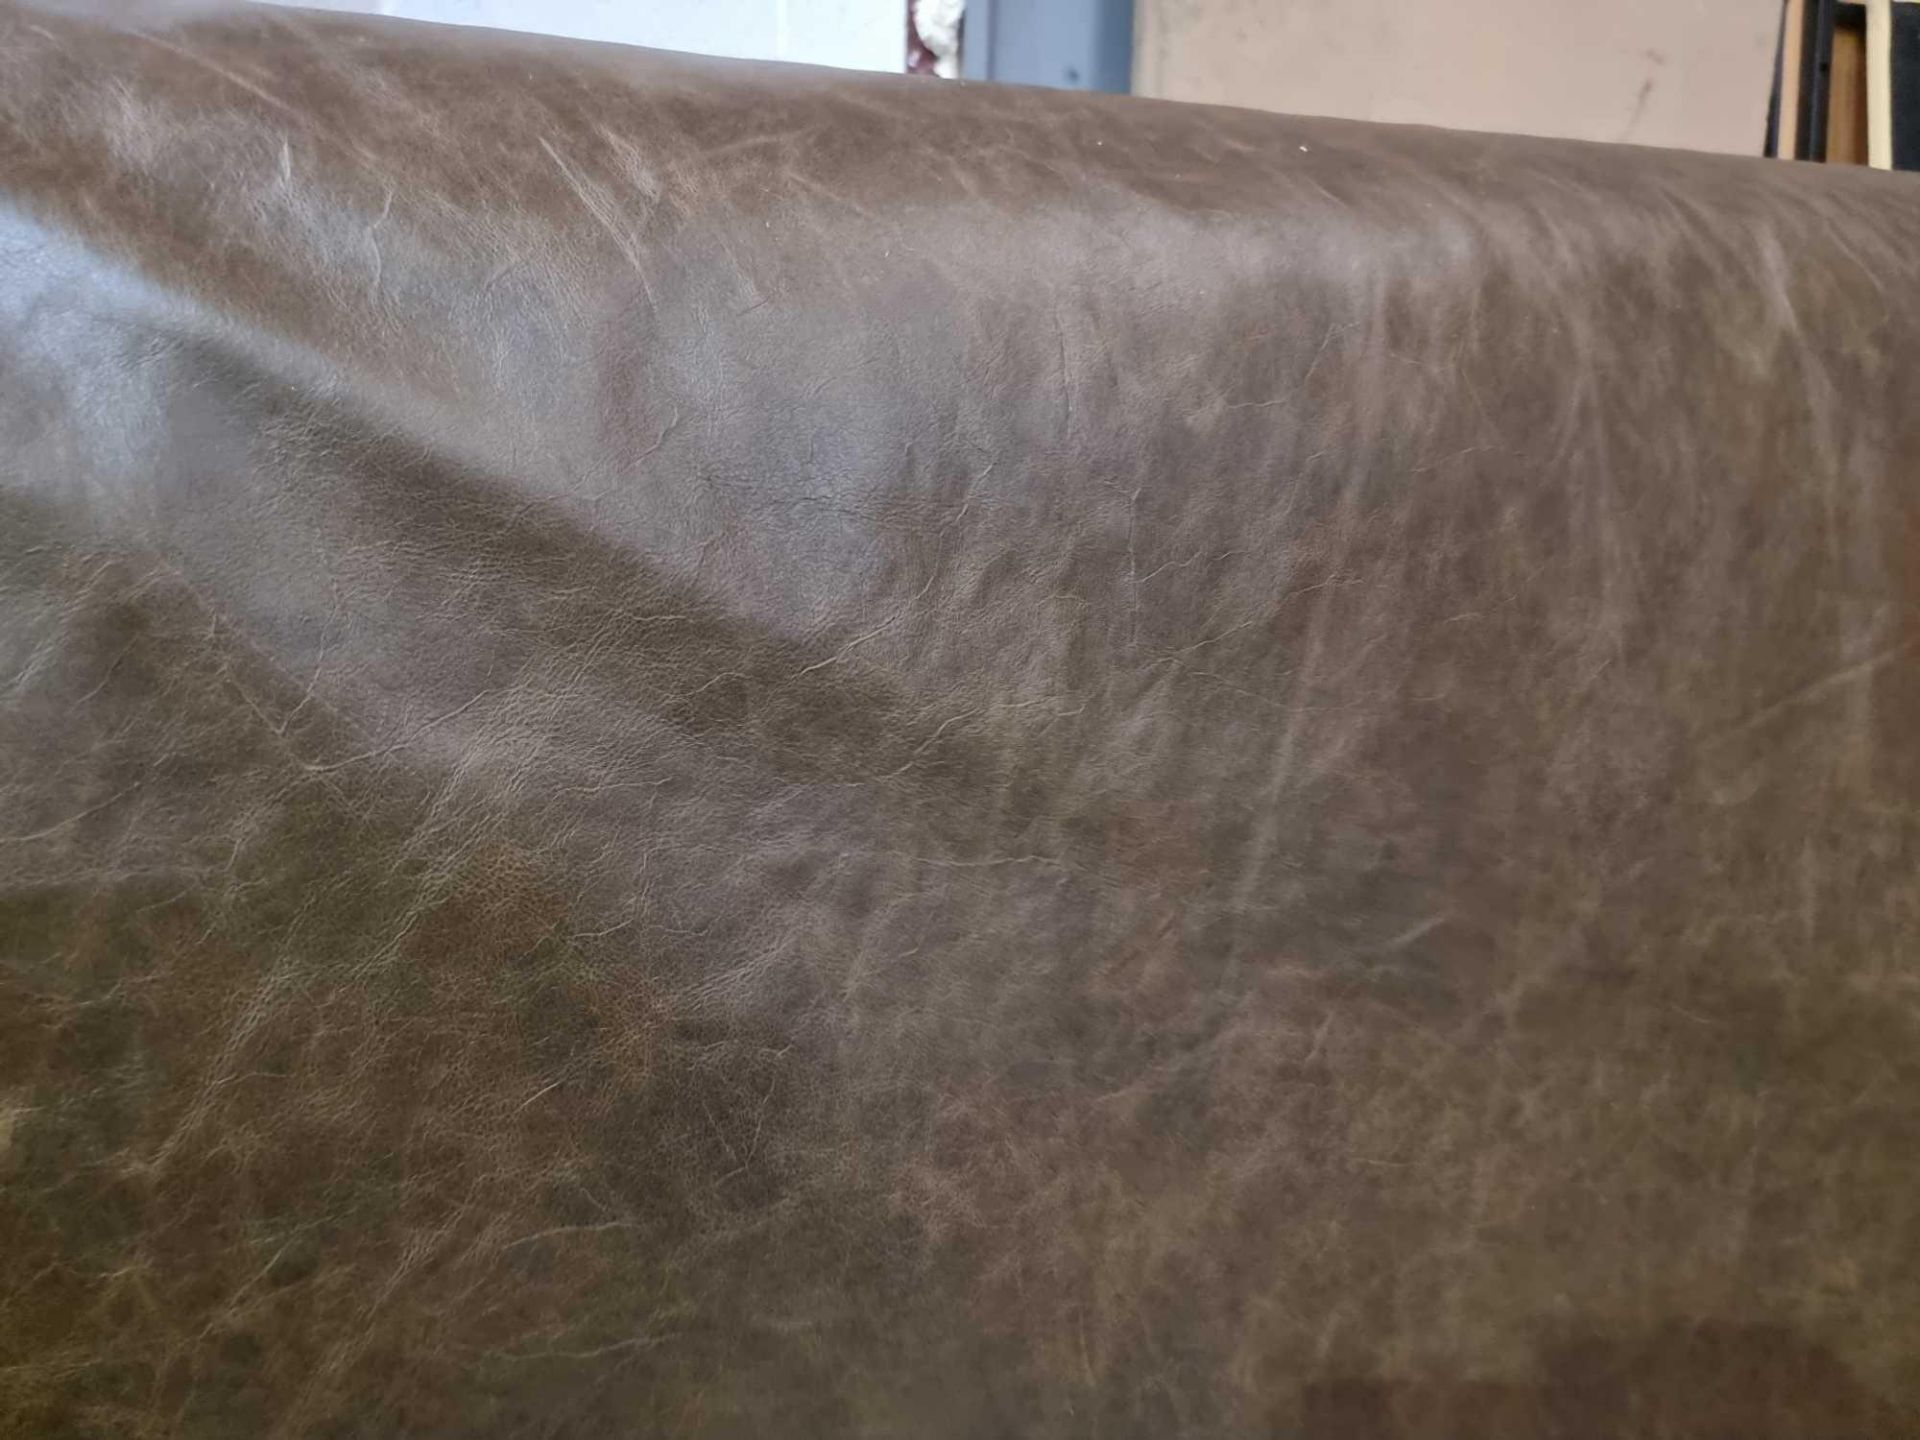 Yarwood Mustang Moss Leather Hide approximately 4 62M2 2 2 x 2 1cm ( Hide No,209)